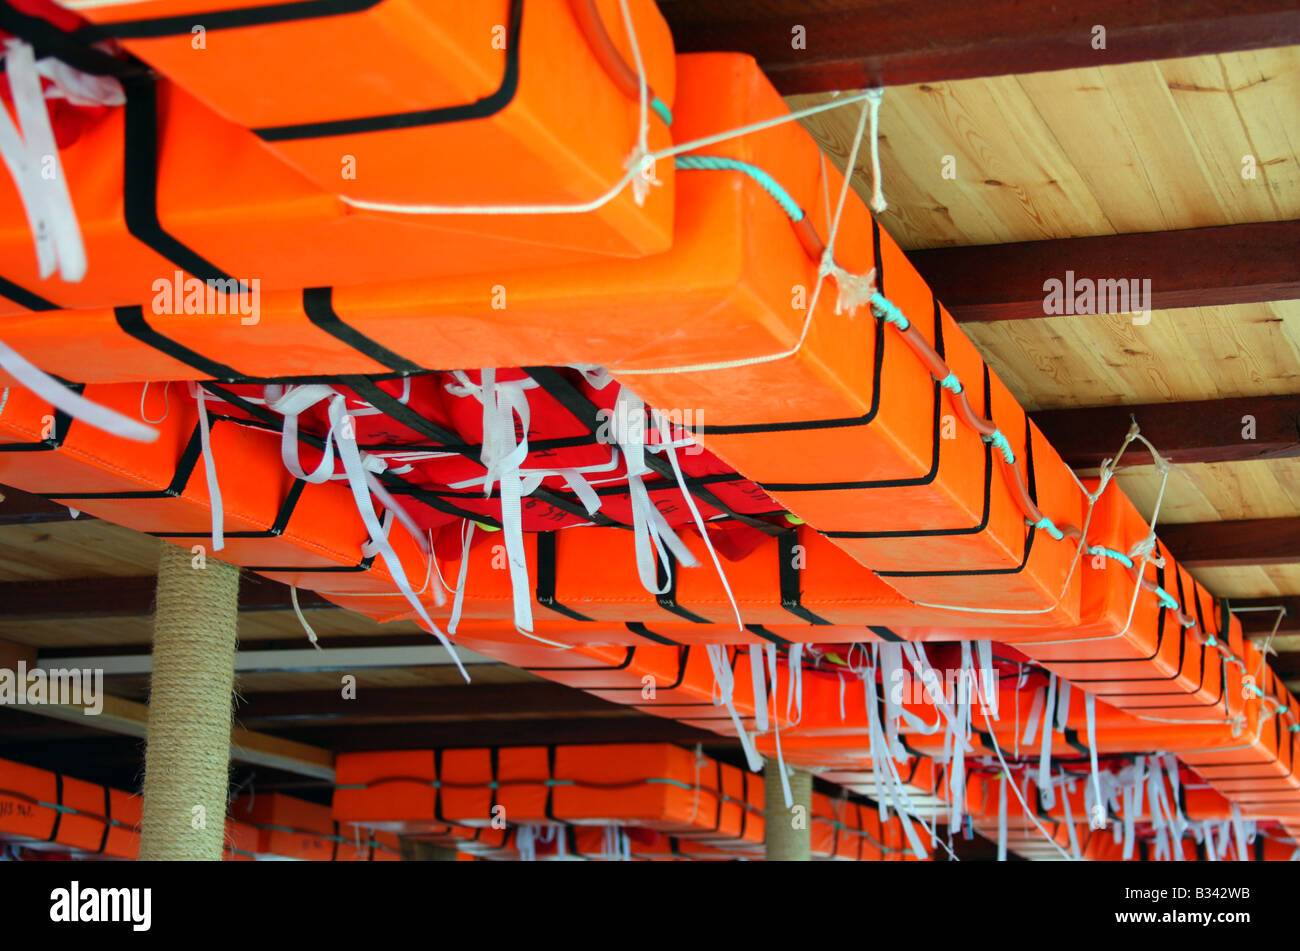 Orange life rafts attached on the sealing of the ship. Stock Photo